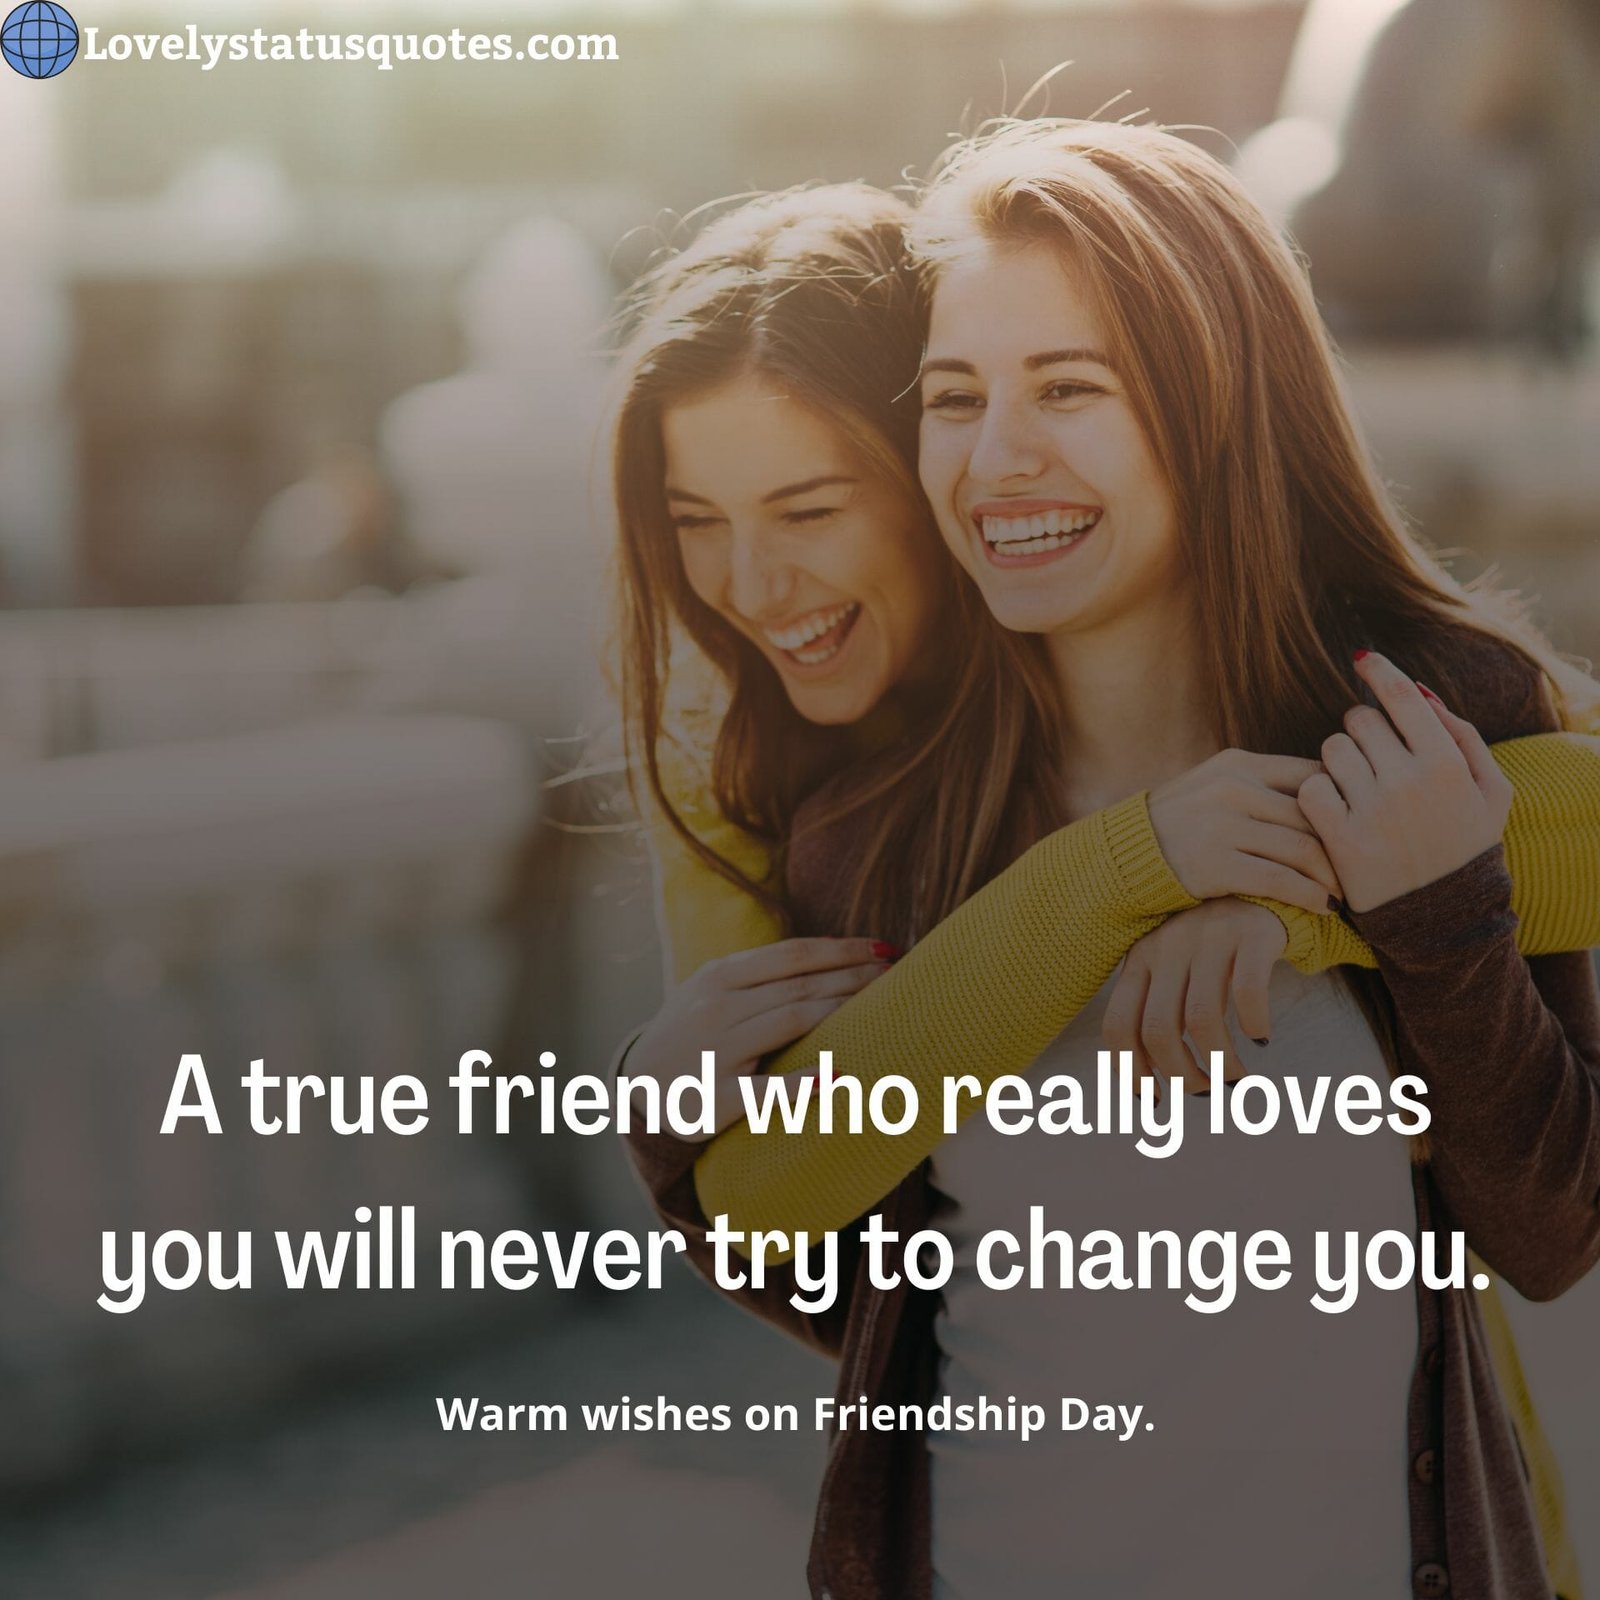 Warm wishes on Friendship Day.A true friend who really loves you will never try to change you.